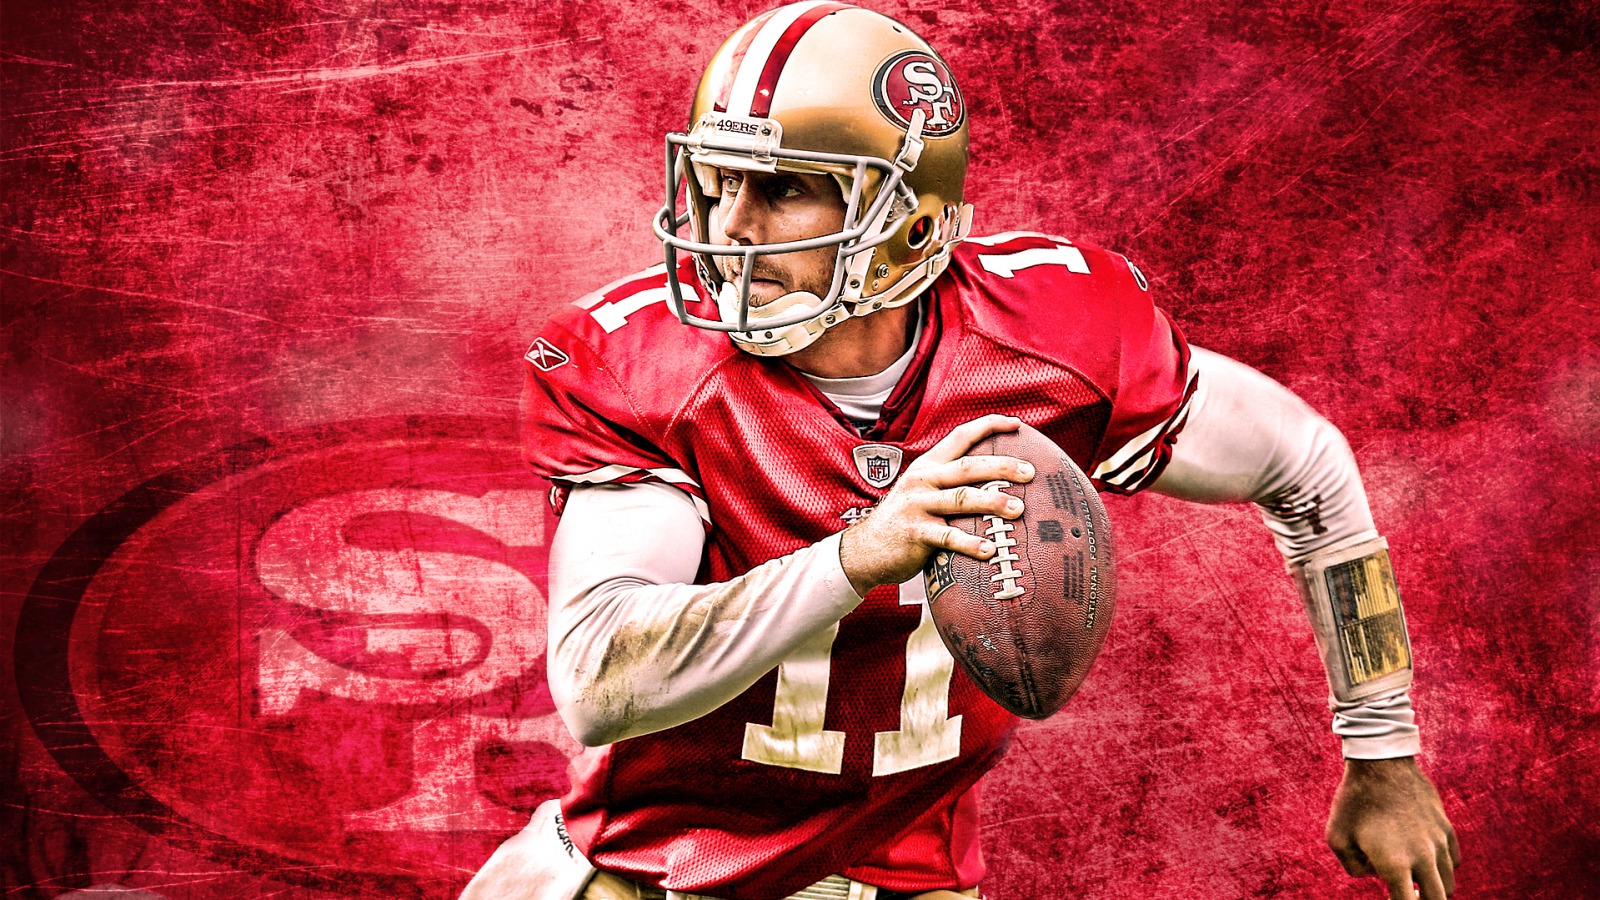 Wallpaper of the day San Francisco 49ers San Francisco 49ers 1600x900